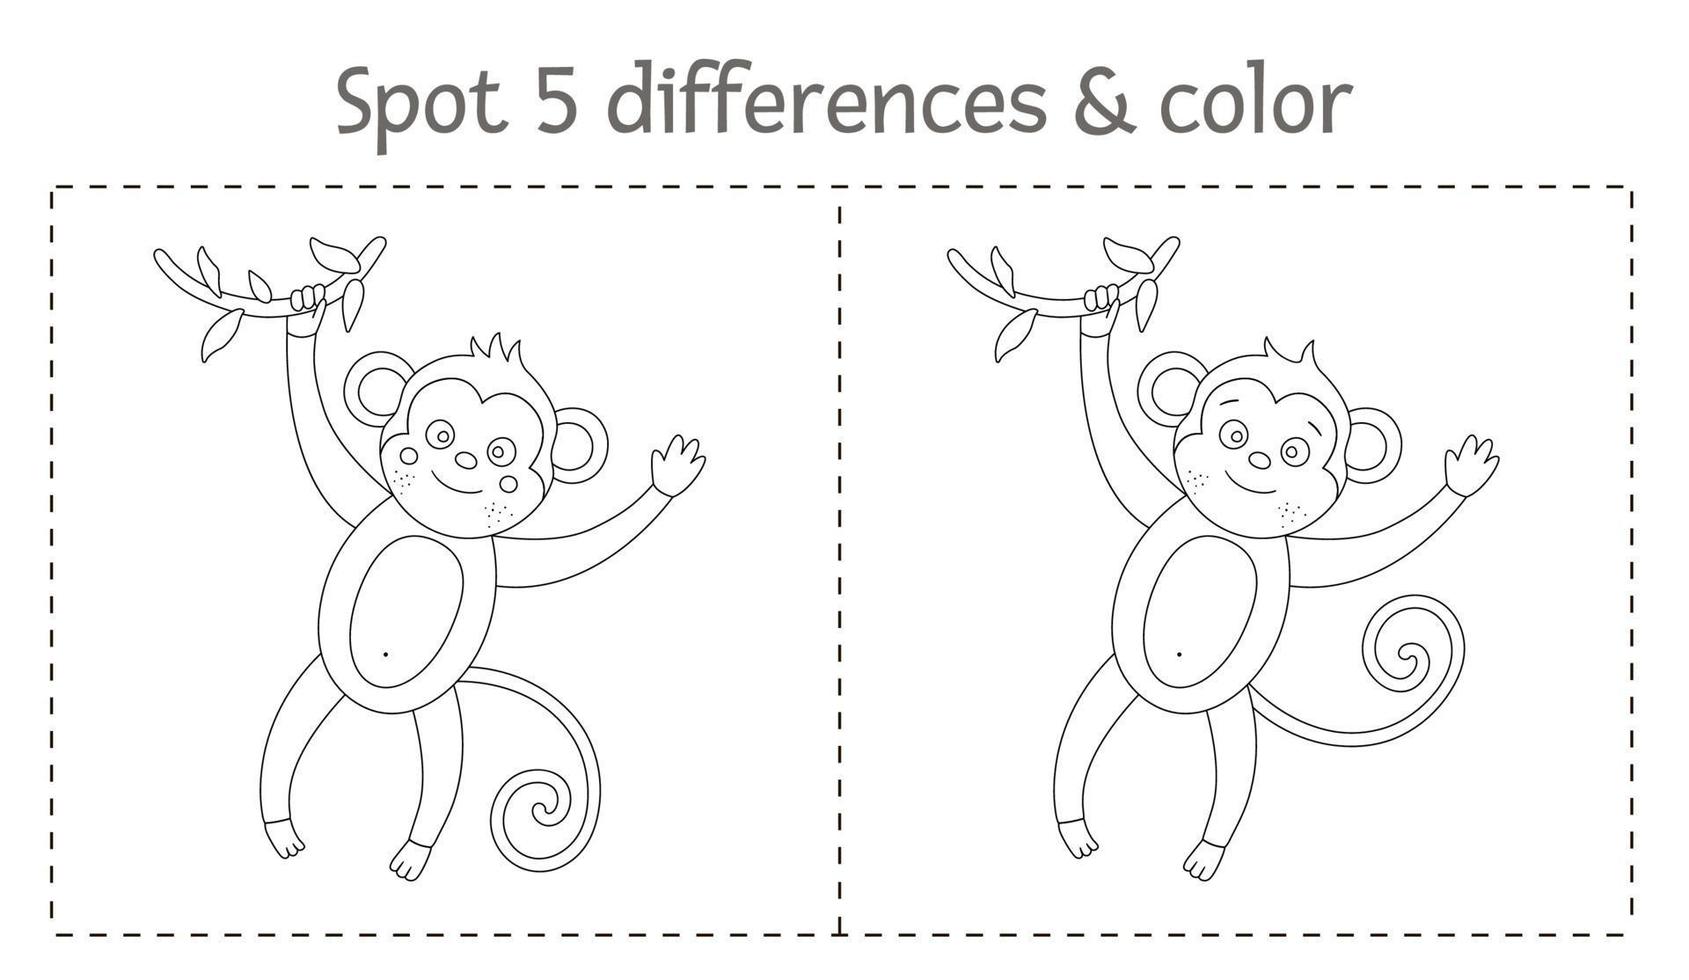 Tropical find differences and color game for children. Summer black and white tropic preschool activity with monkey. Fun coloring page for kids vector